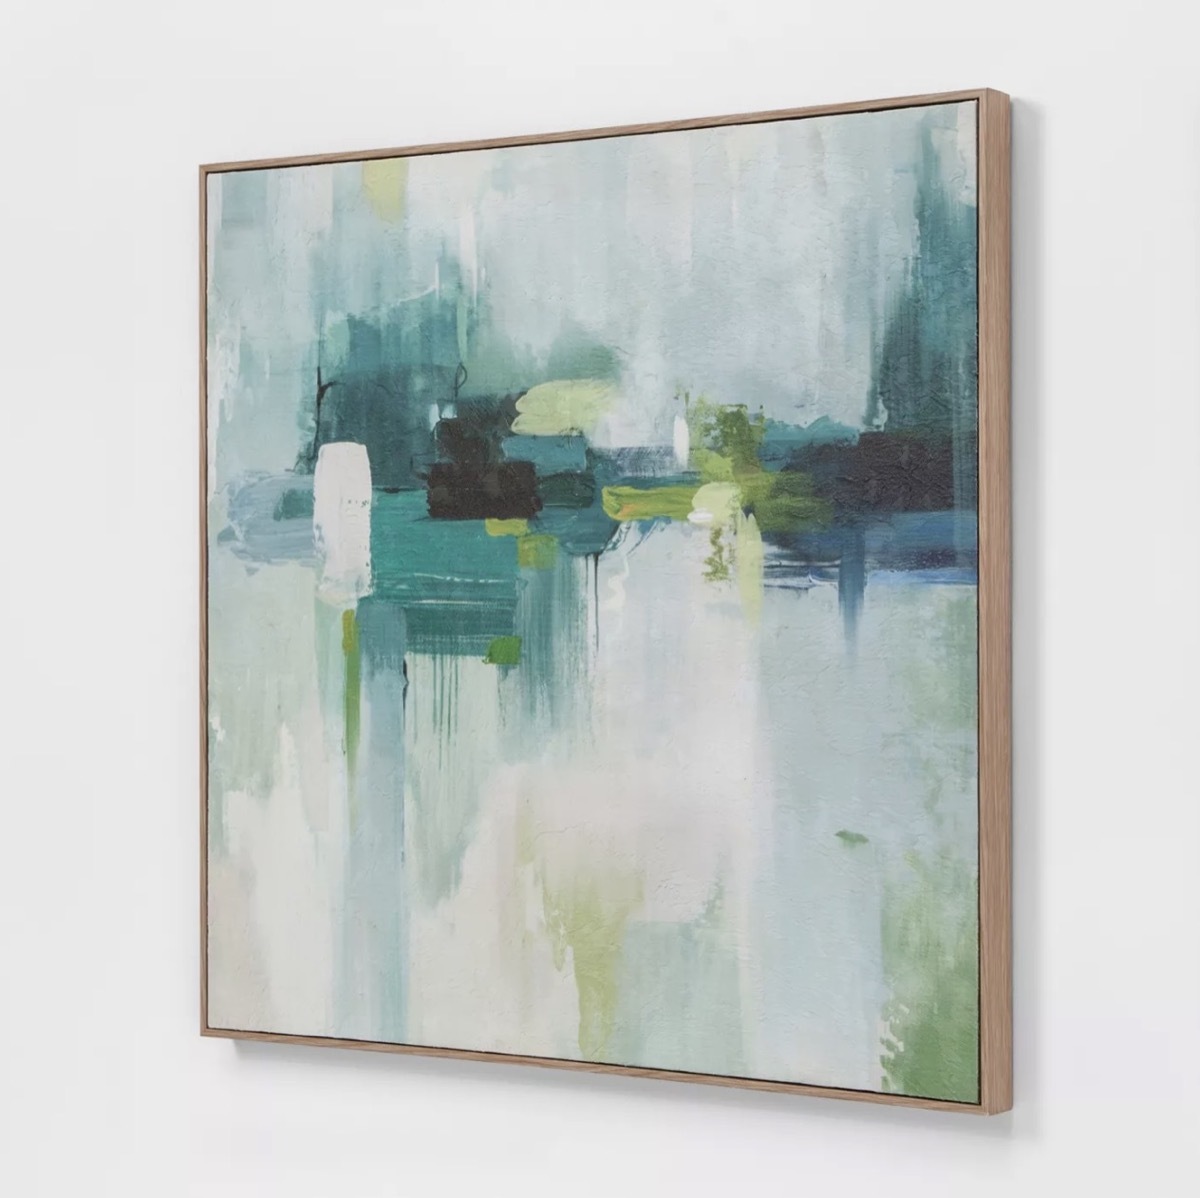 green and white abstract painting, target home decor items